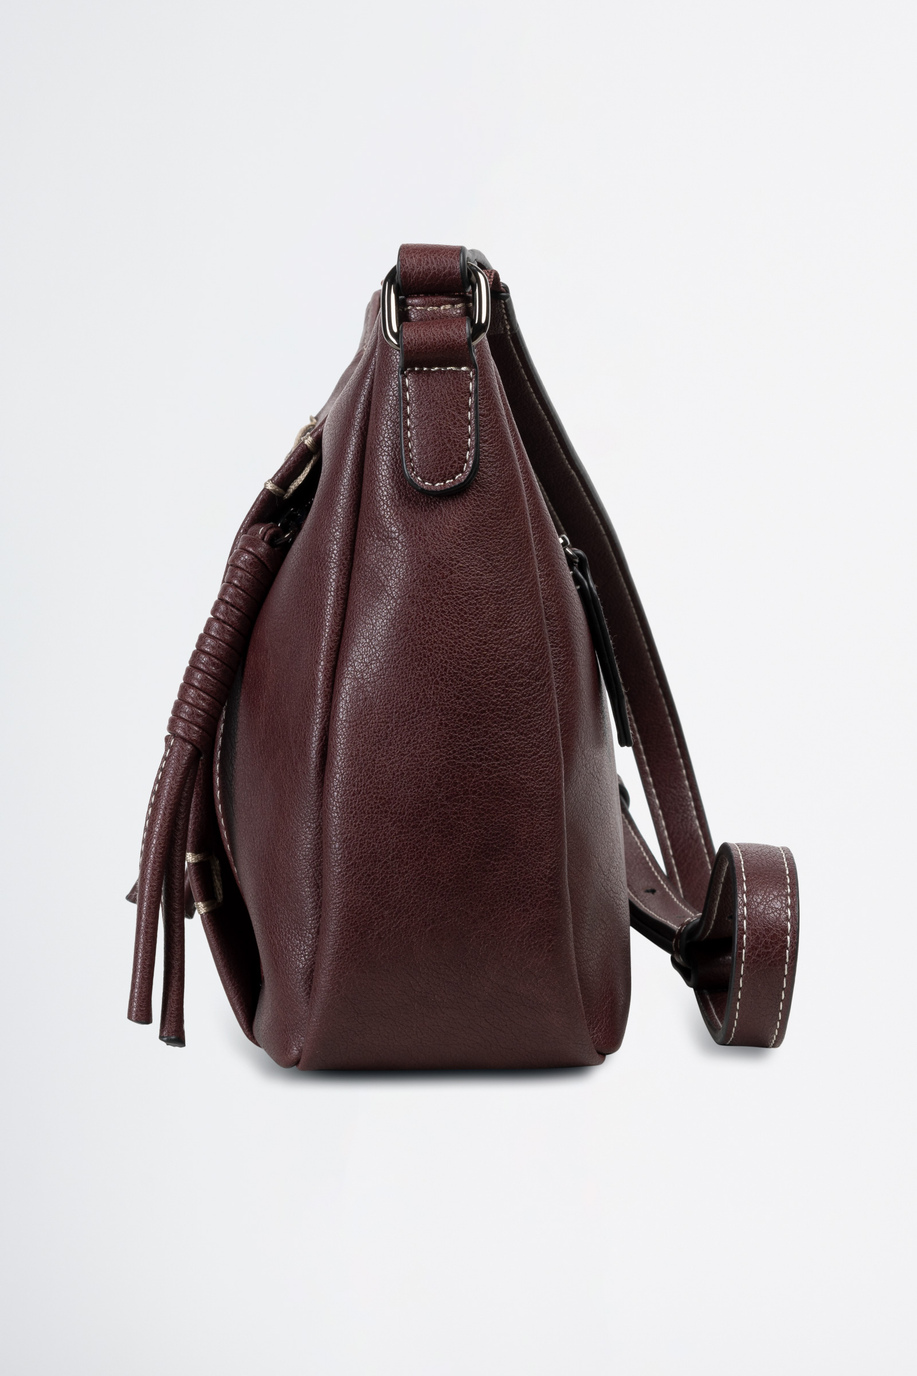 water Monograph hail La Martina women's bags: discover the online collection